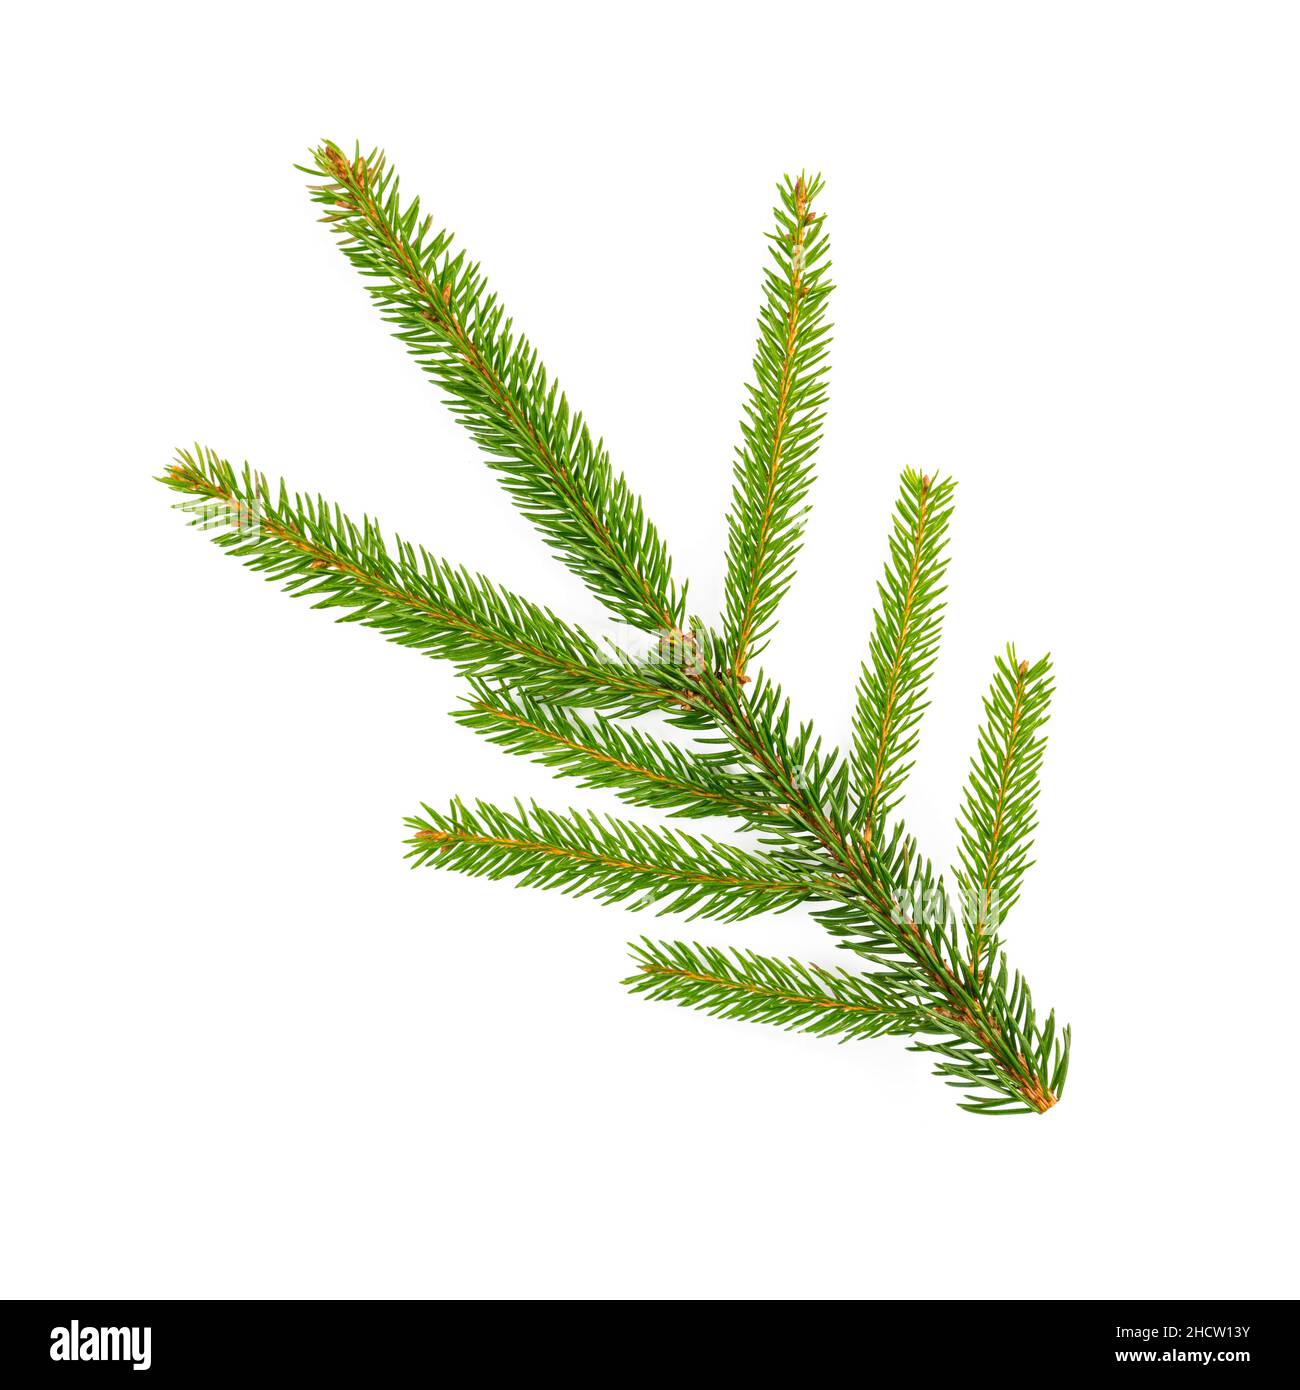 spruce tree branch isolated on white background Stock Photo